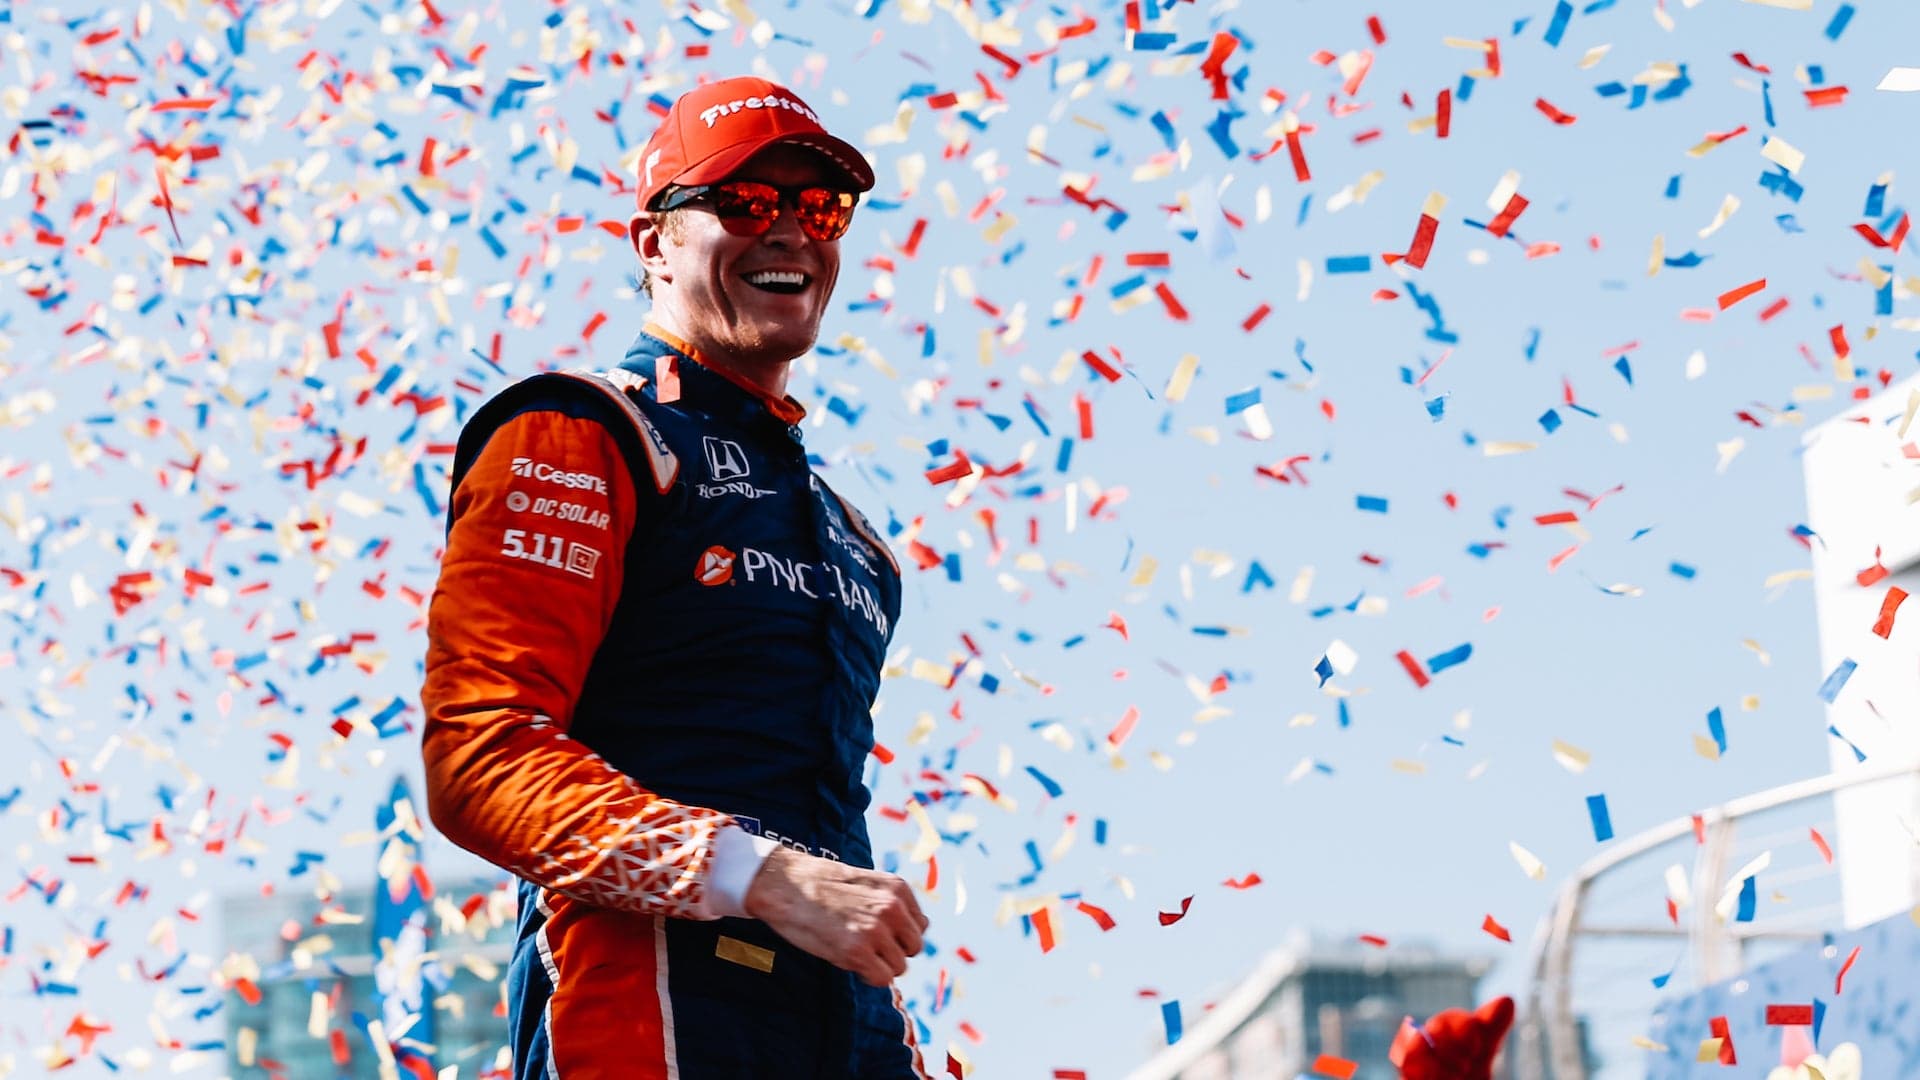 IndyCar: Scott Dixon Signs New Multi-Year Deal With Chip Ganassi Racing